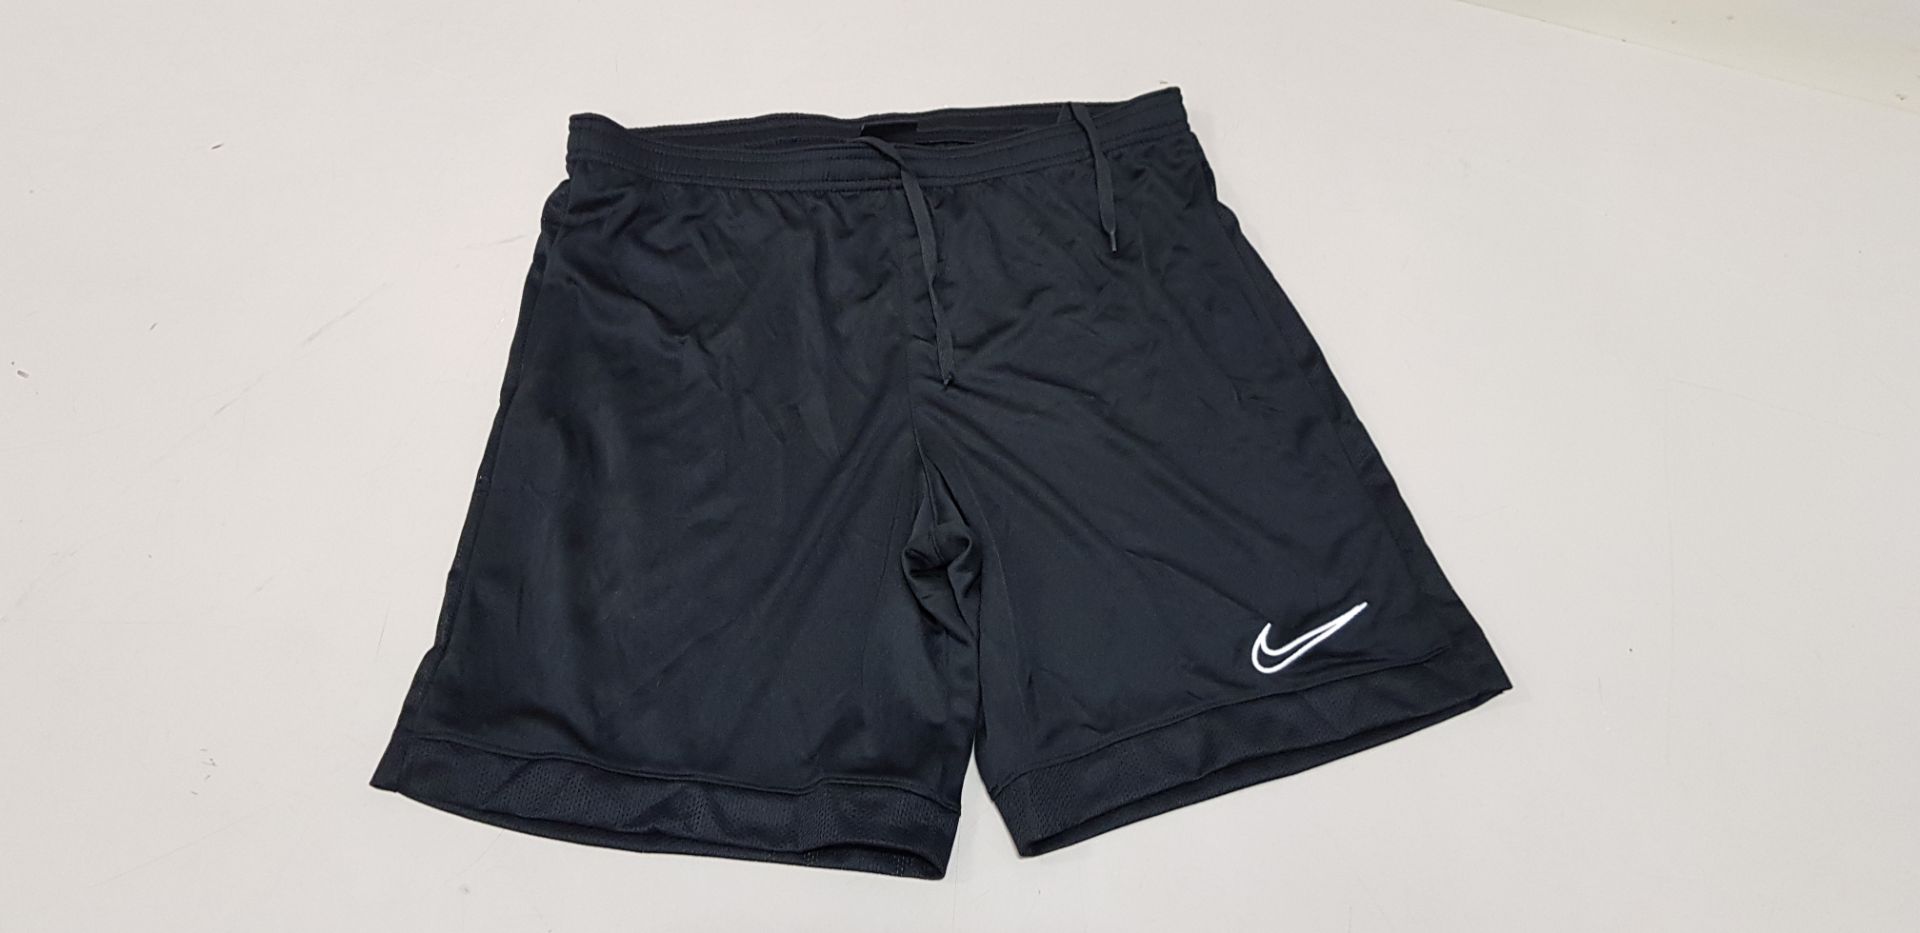 21 X BRAND NEW NIKE DRY FIT SHORTS IN BLACK AND WHITE IN VARIOUS SIZES